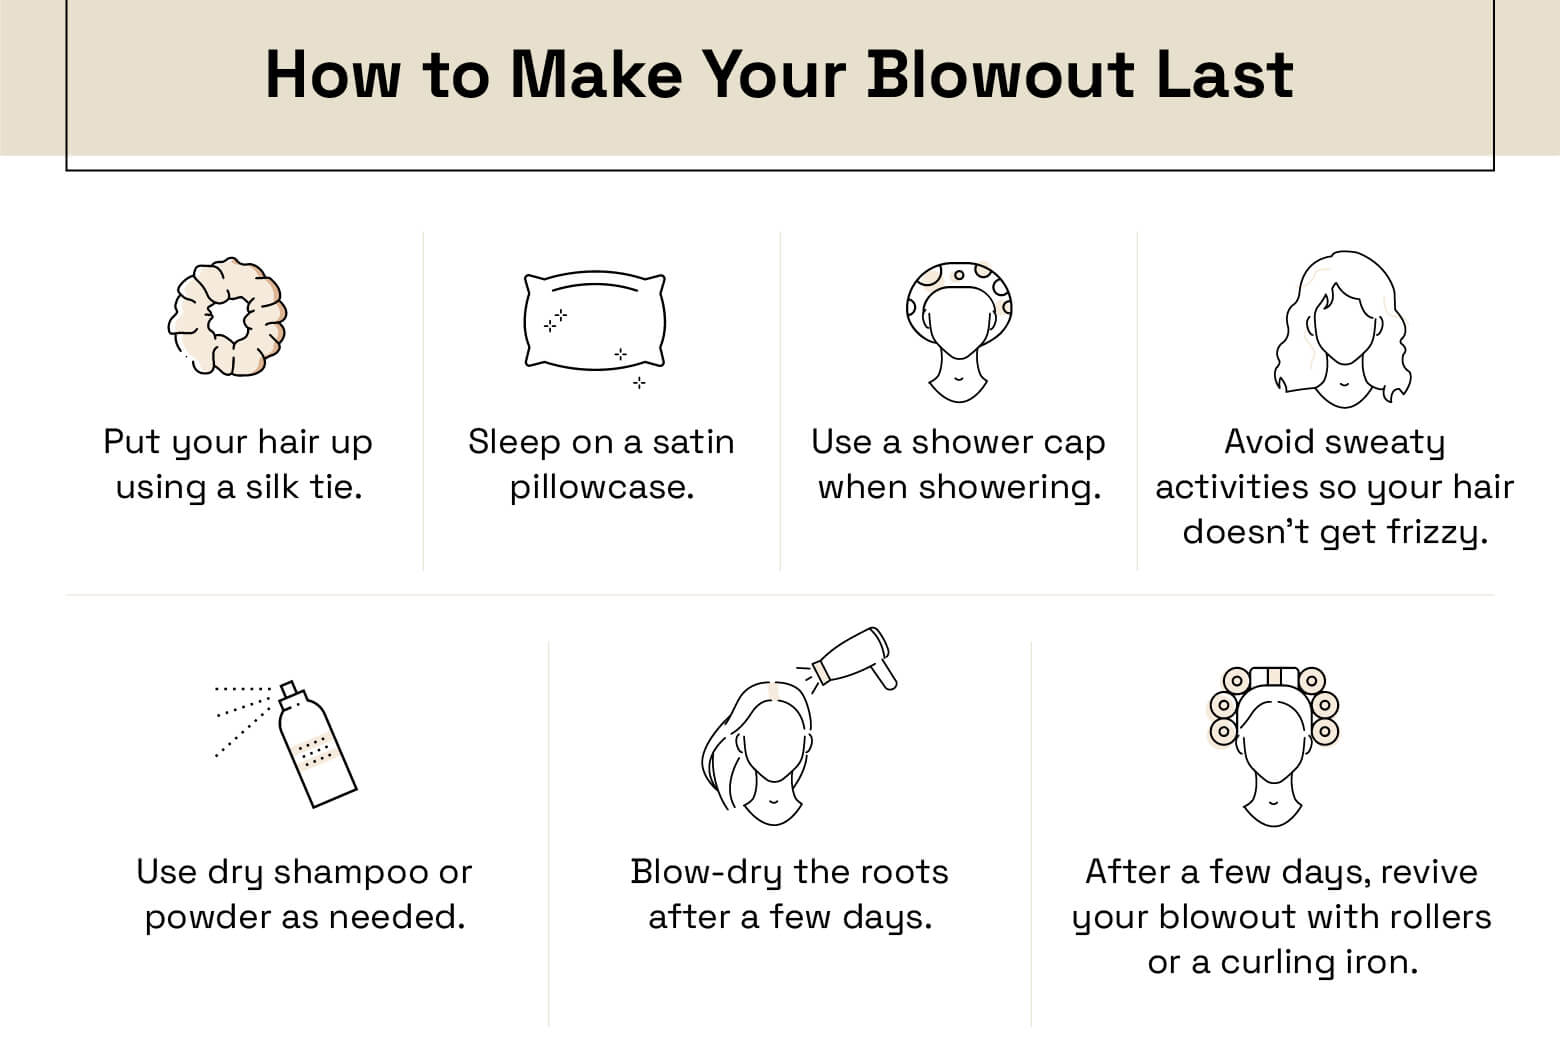 how to make your blowout last